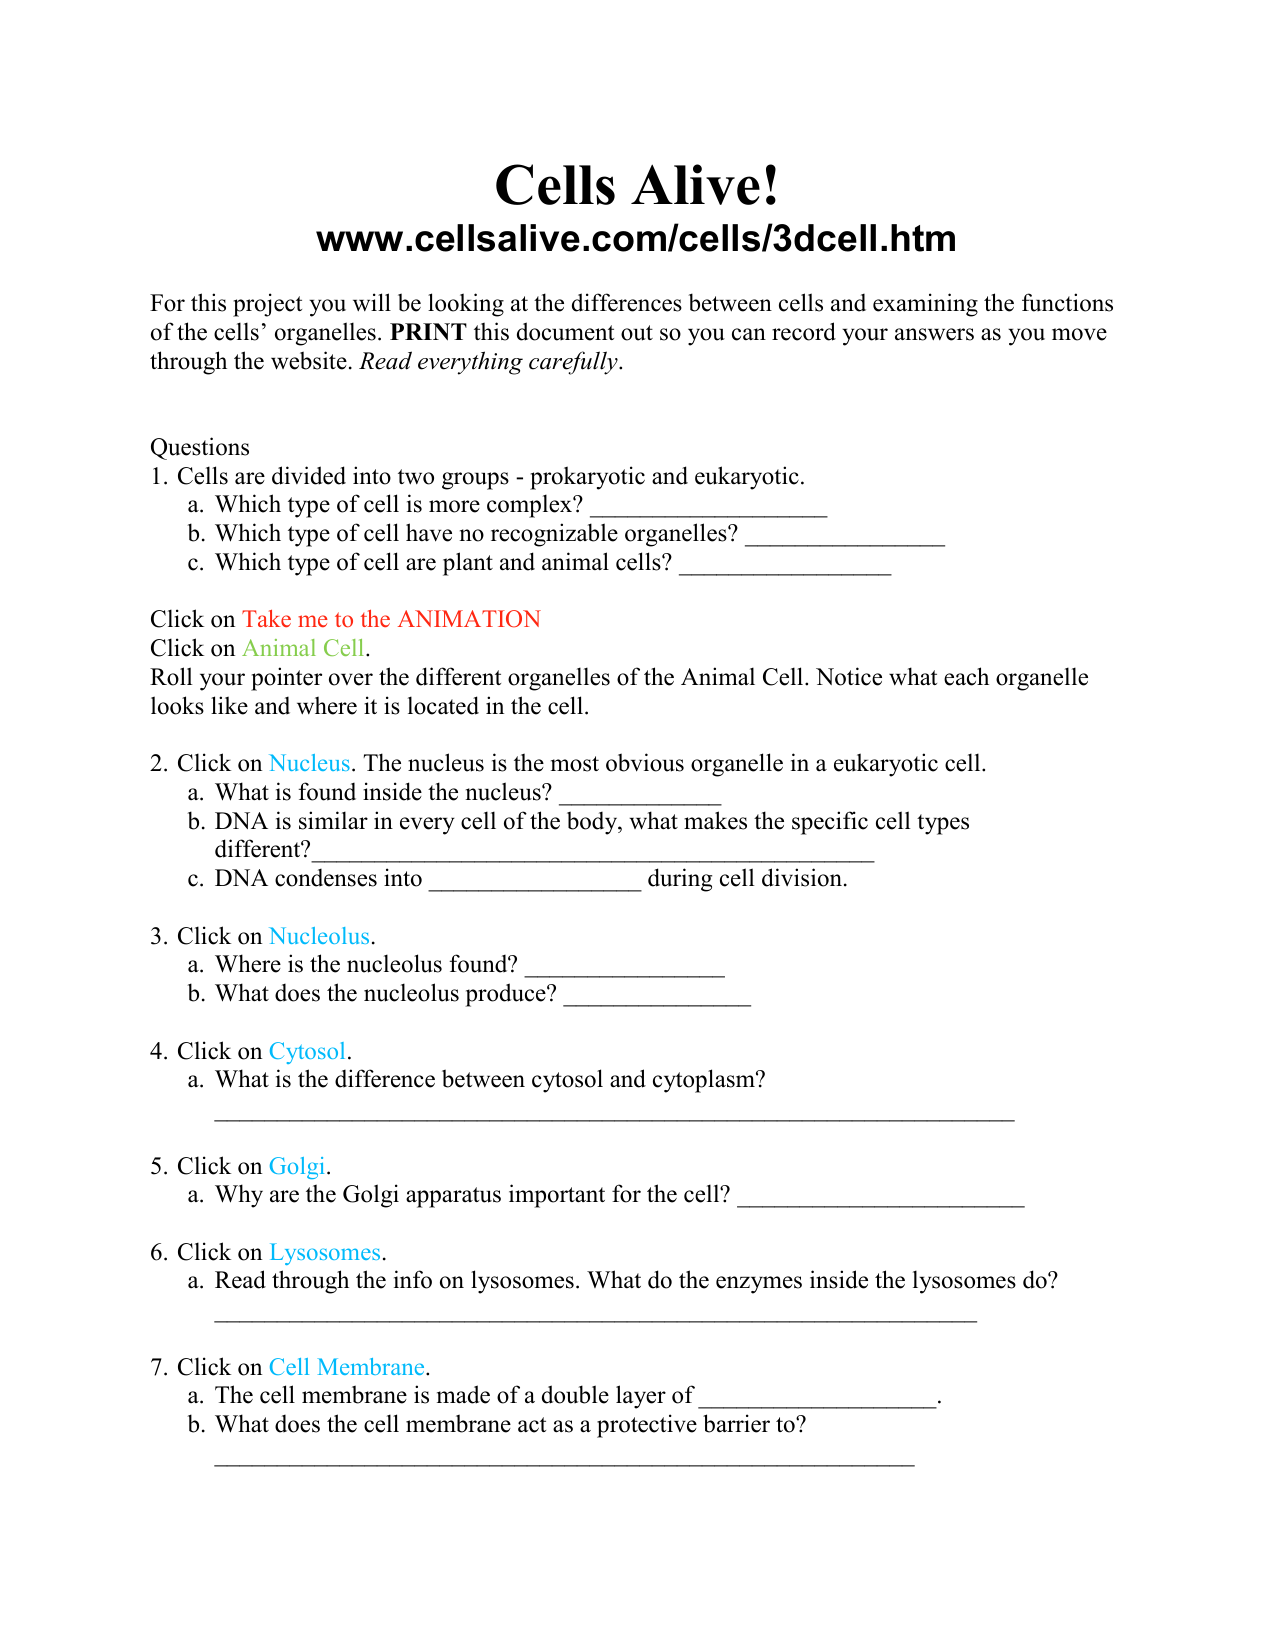 Cells Alive! www.cellsalive.com/cells/22dcell.htm For this project you With Cells Alive Worksheet Answer Key